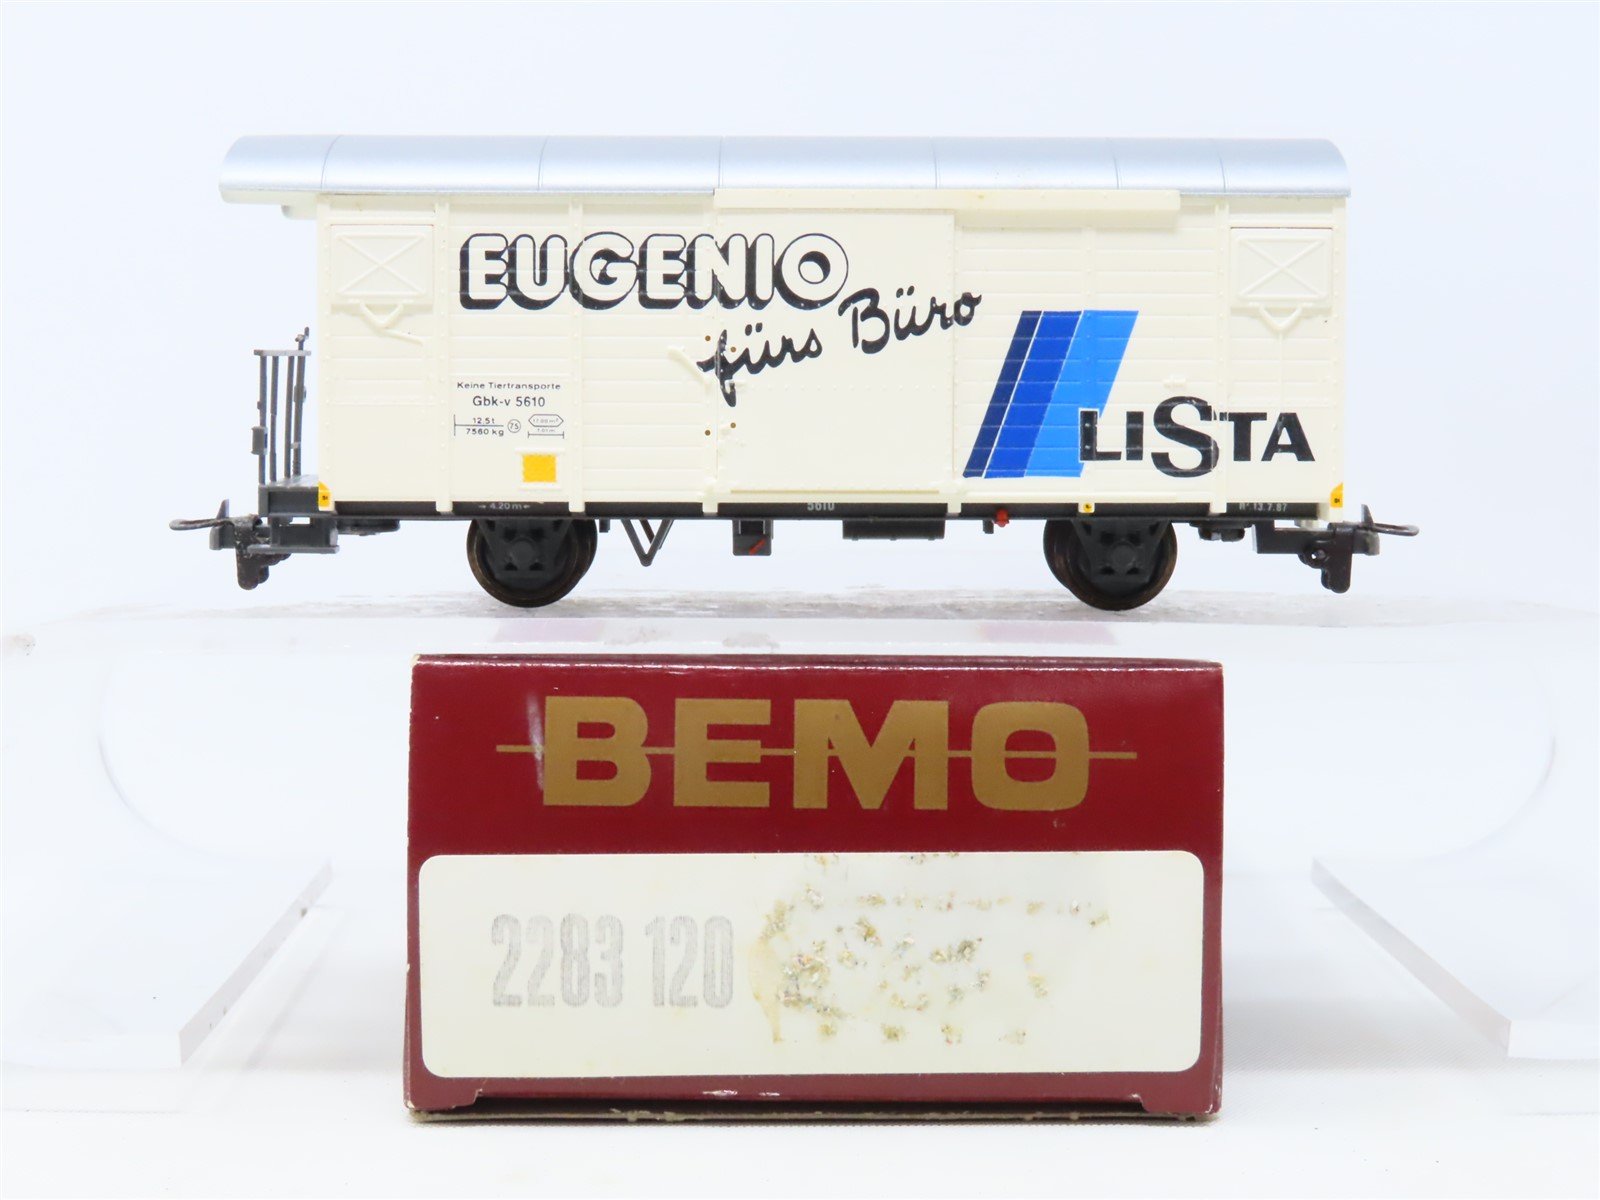 HOm Scale Bemo 2283-120 LISTA AG Eugenio "for the Office" Box Car #5610